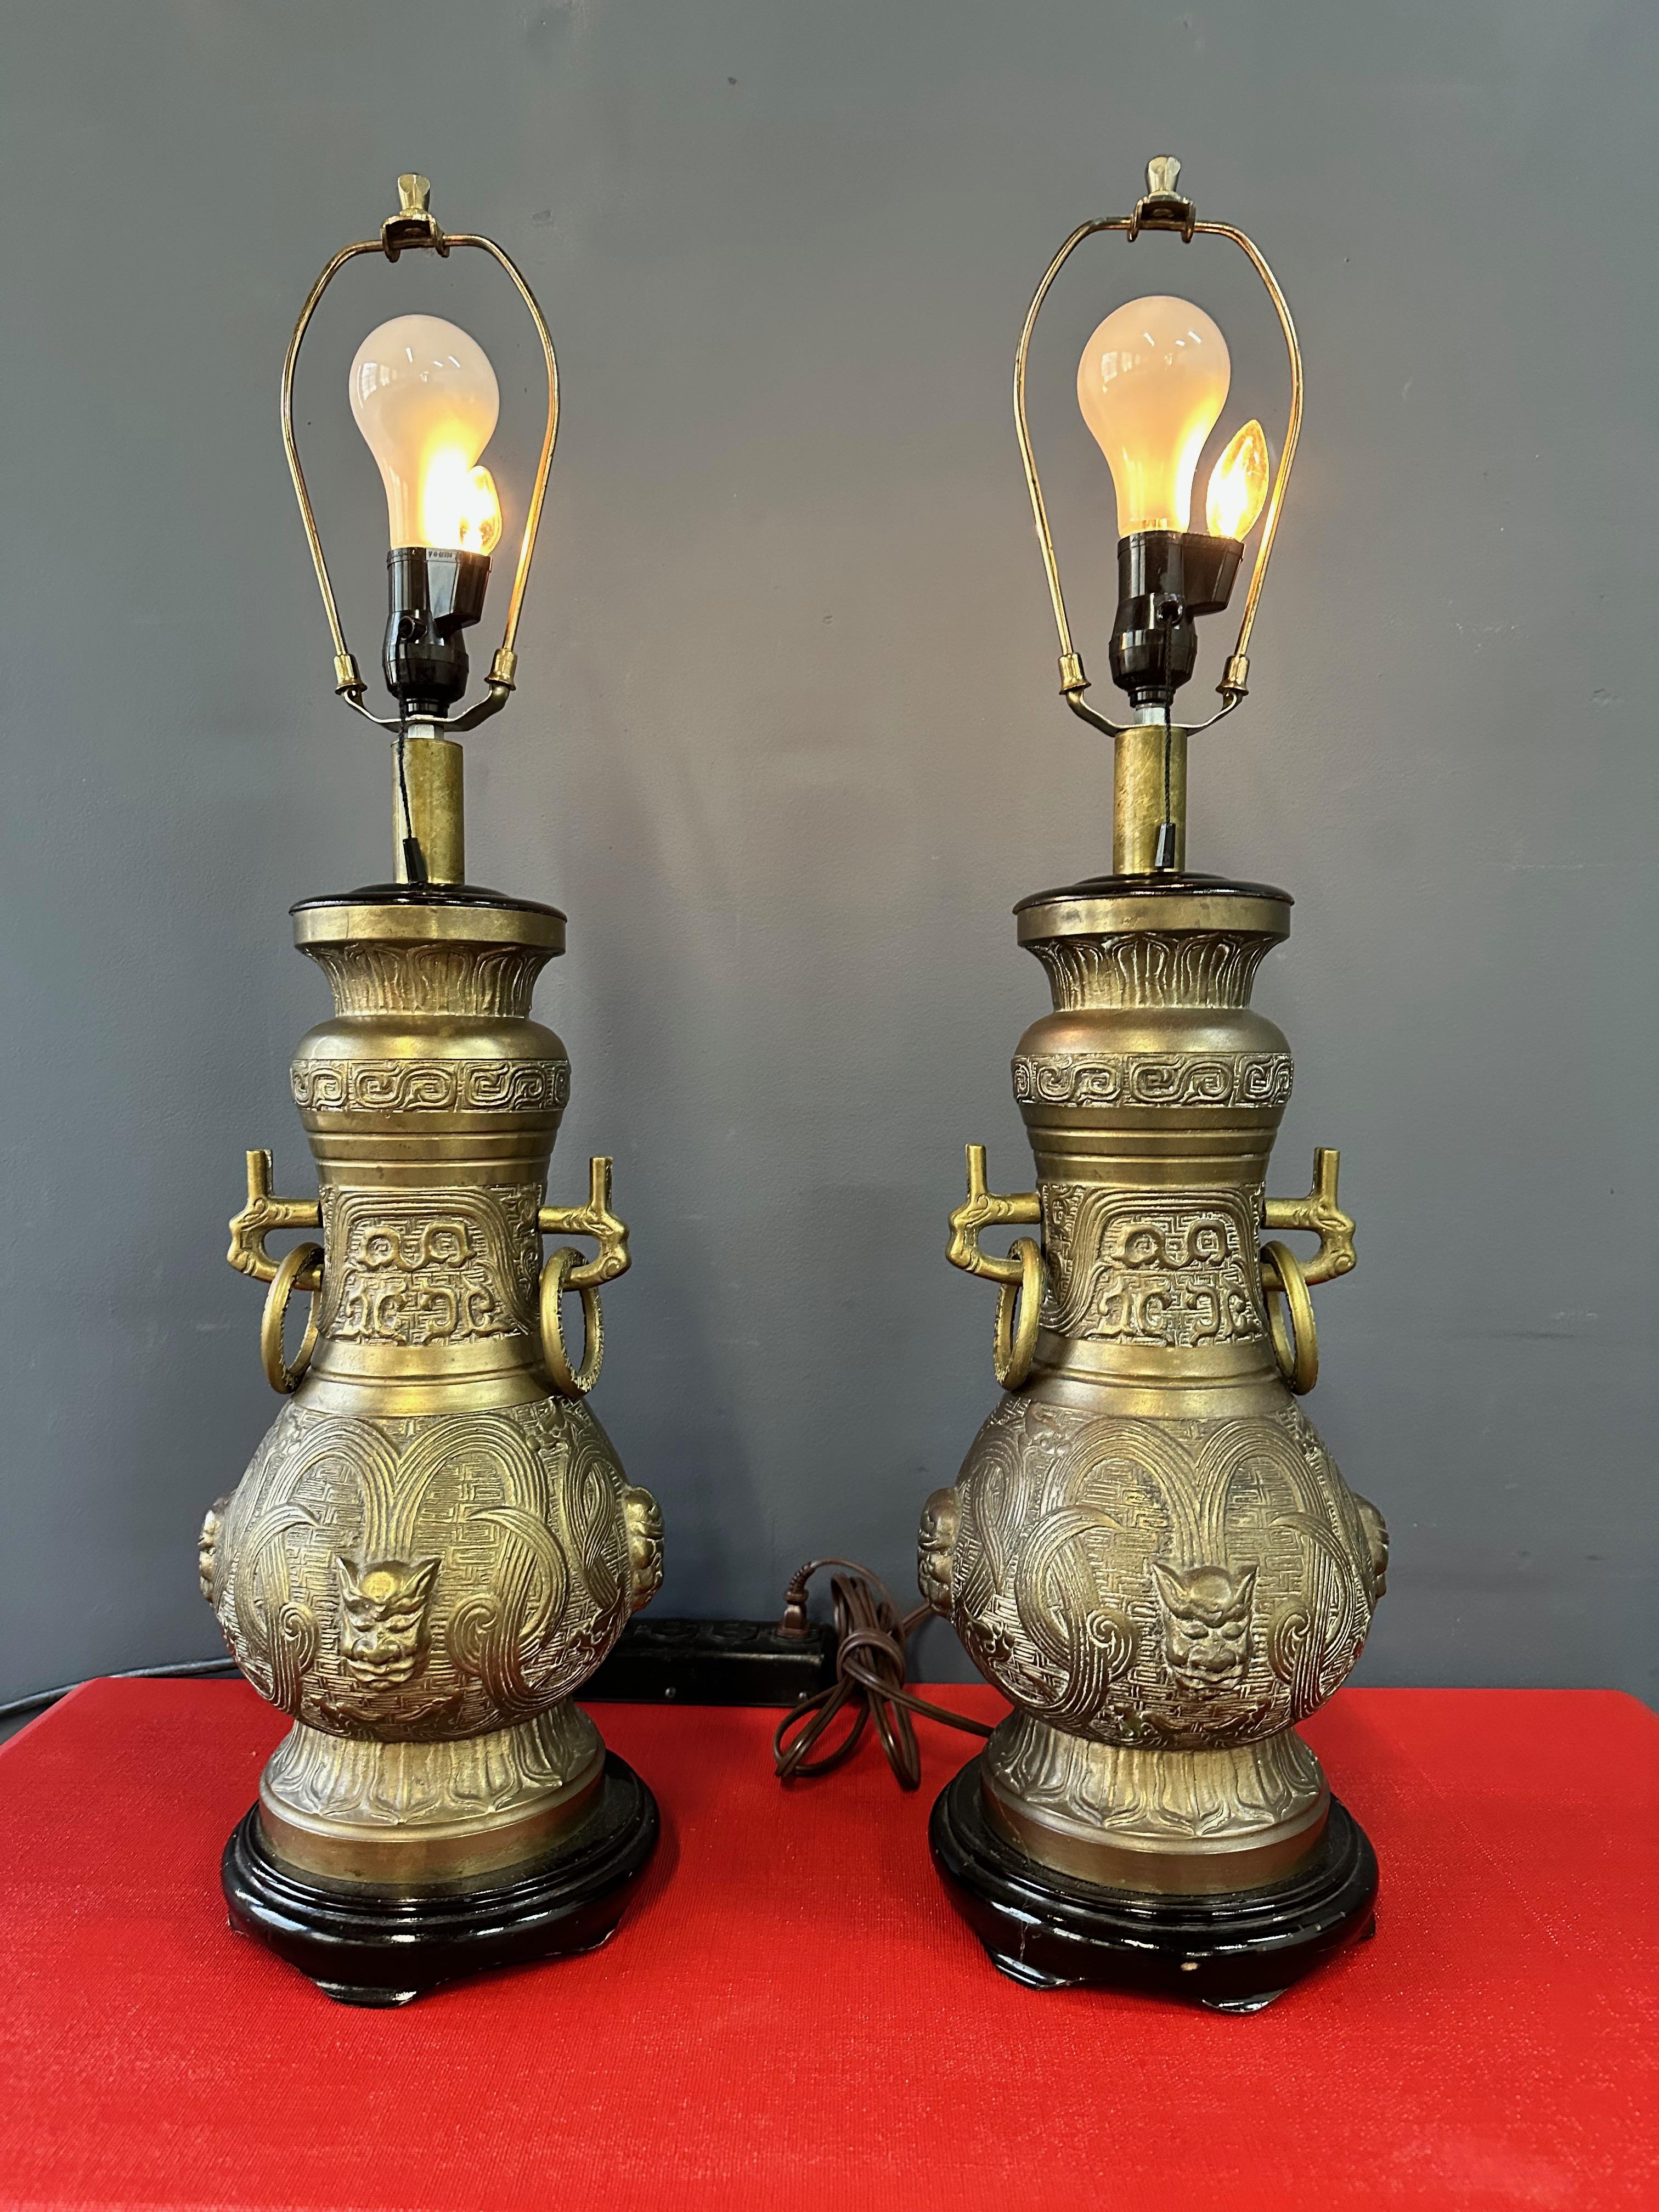 Mid-century bronze table lamps by Pepe Mendoza Featuring ebonized bases, loose rings on the sides with an Oriental jar design. There are three settings for the lighting, the main light only, the small bulb only, or both on at the same time. A brass